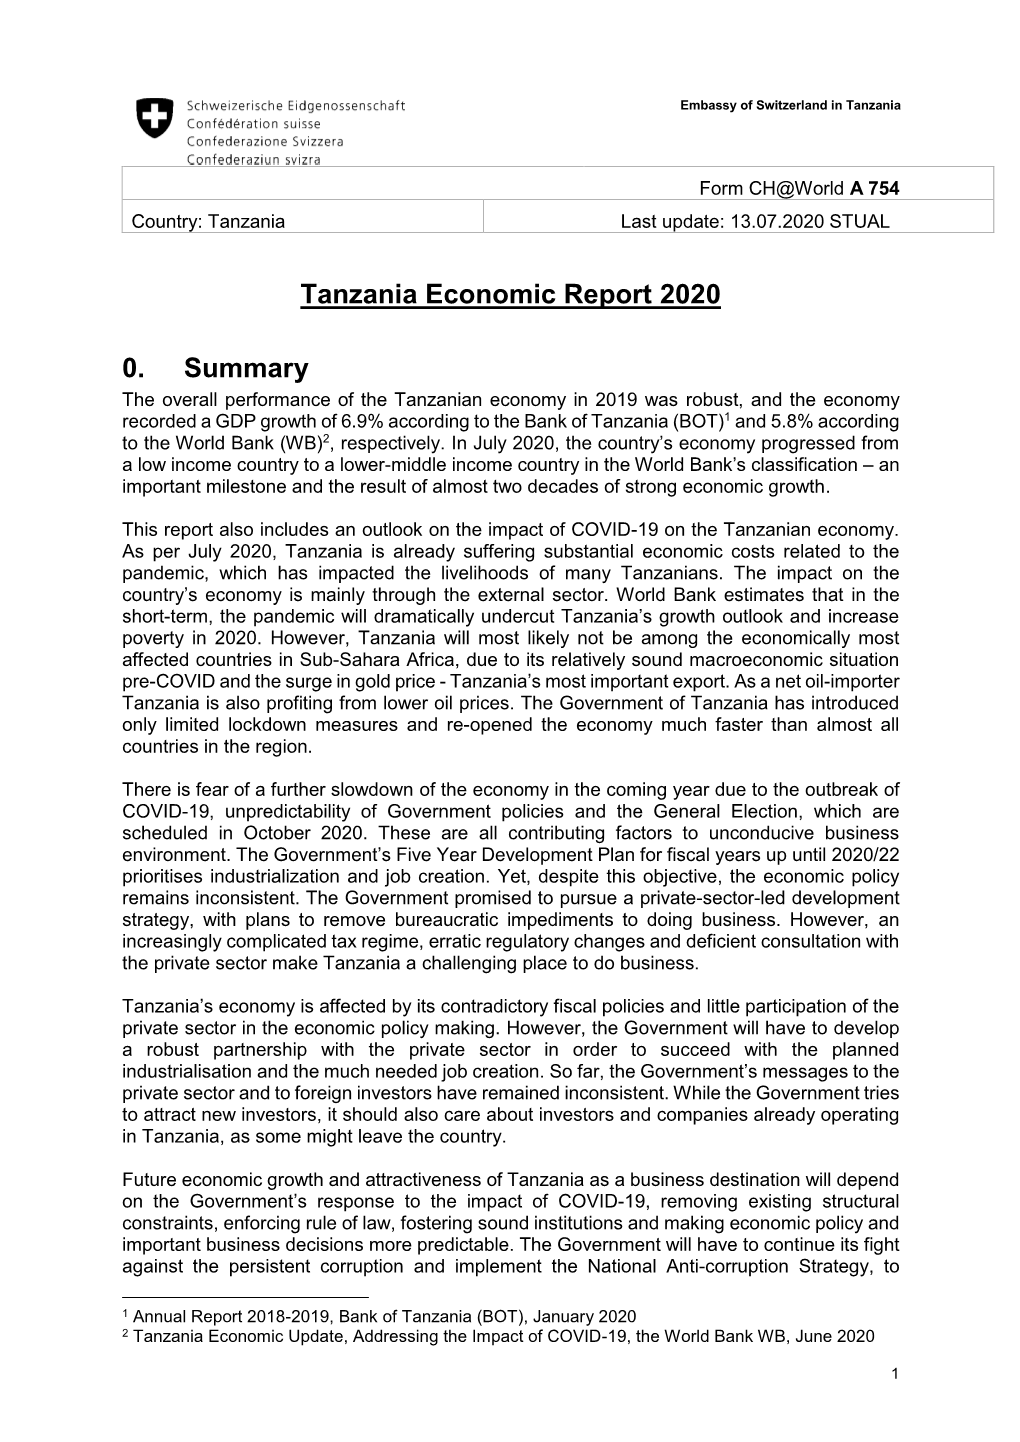 Tanzania Economic Update 2007 and Outlook for 2008